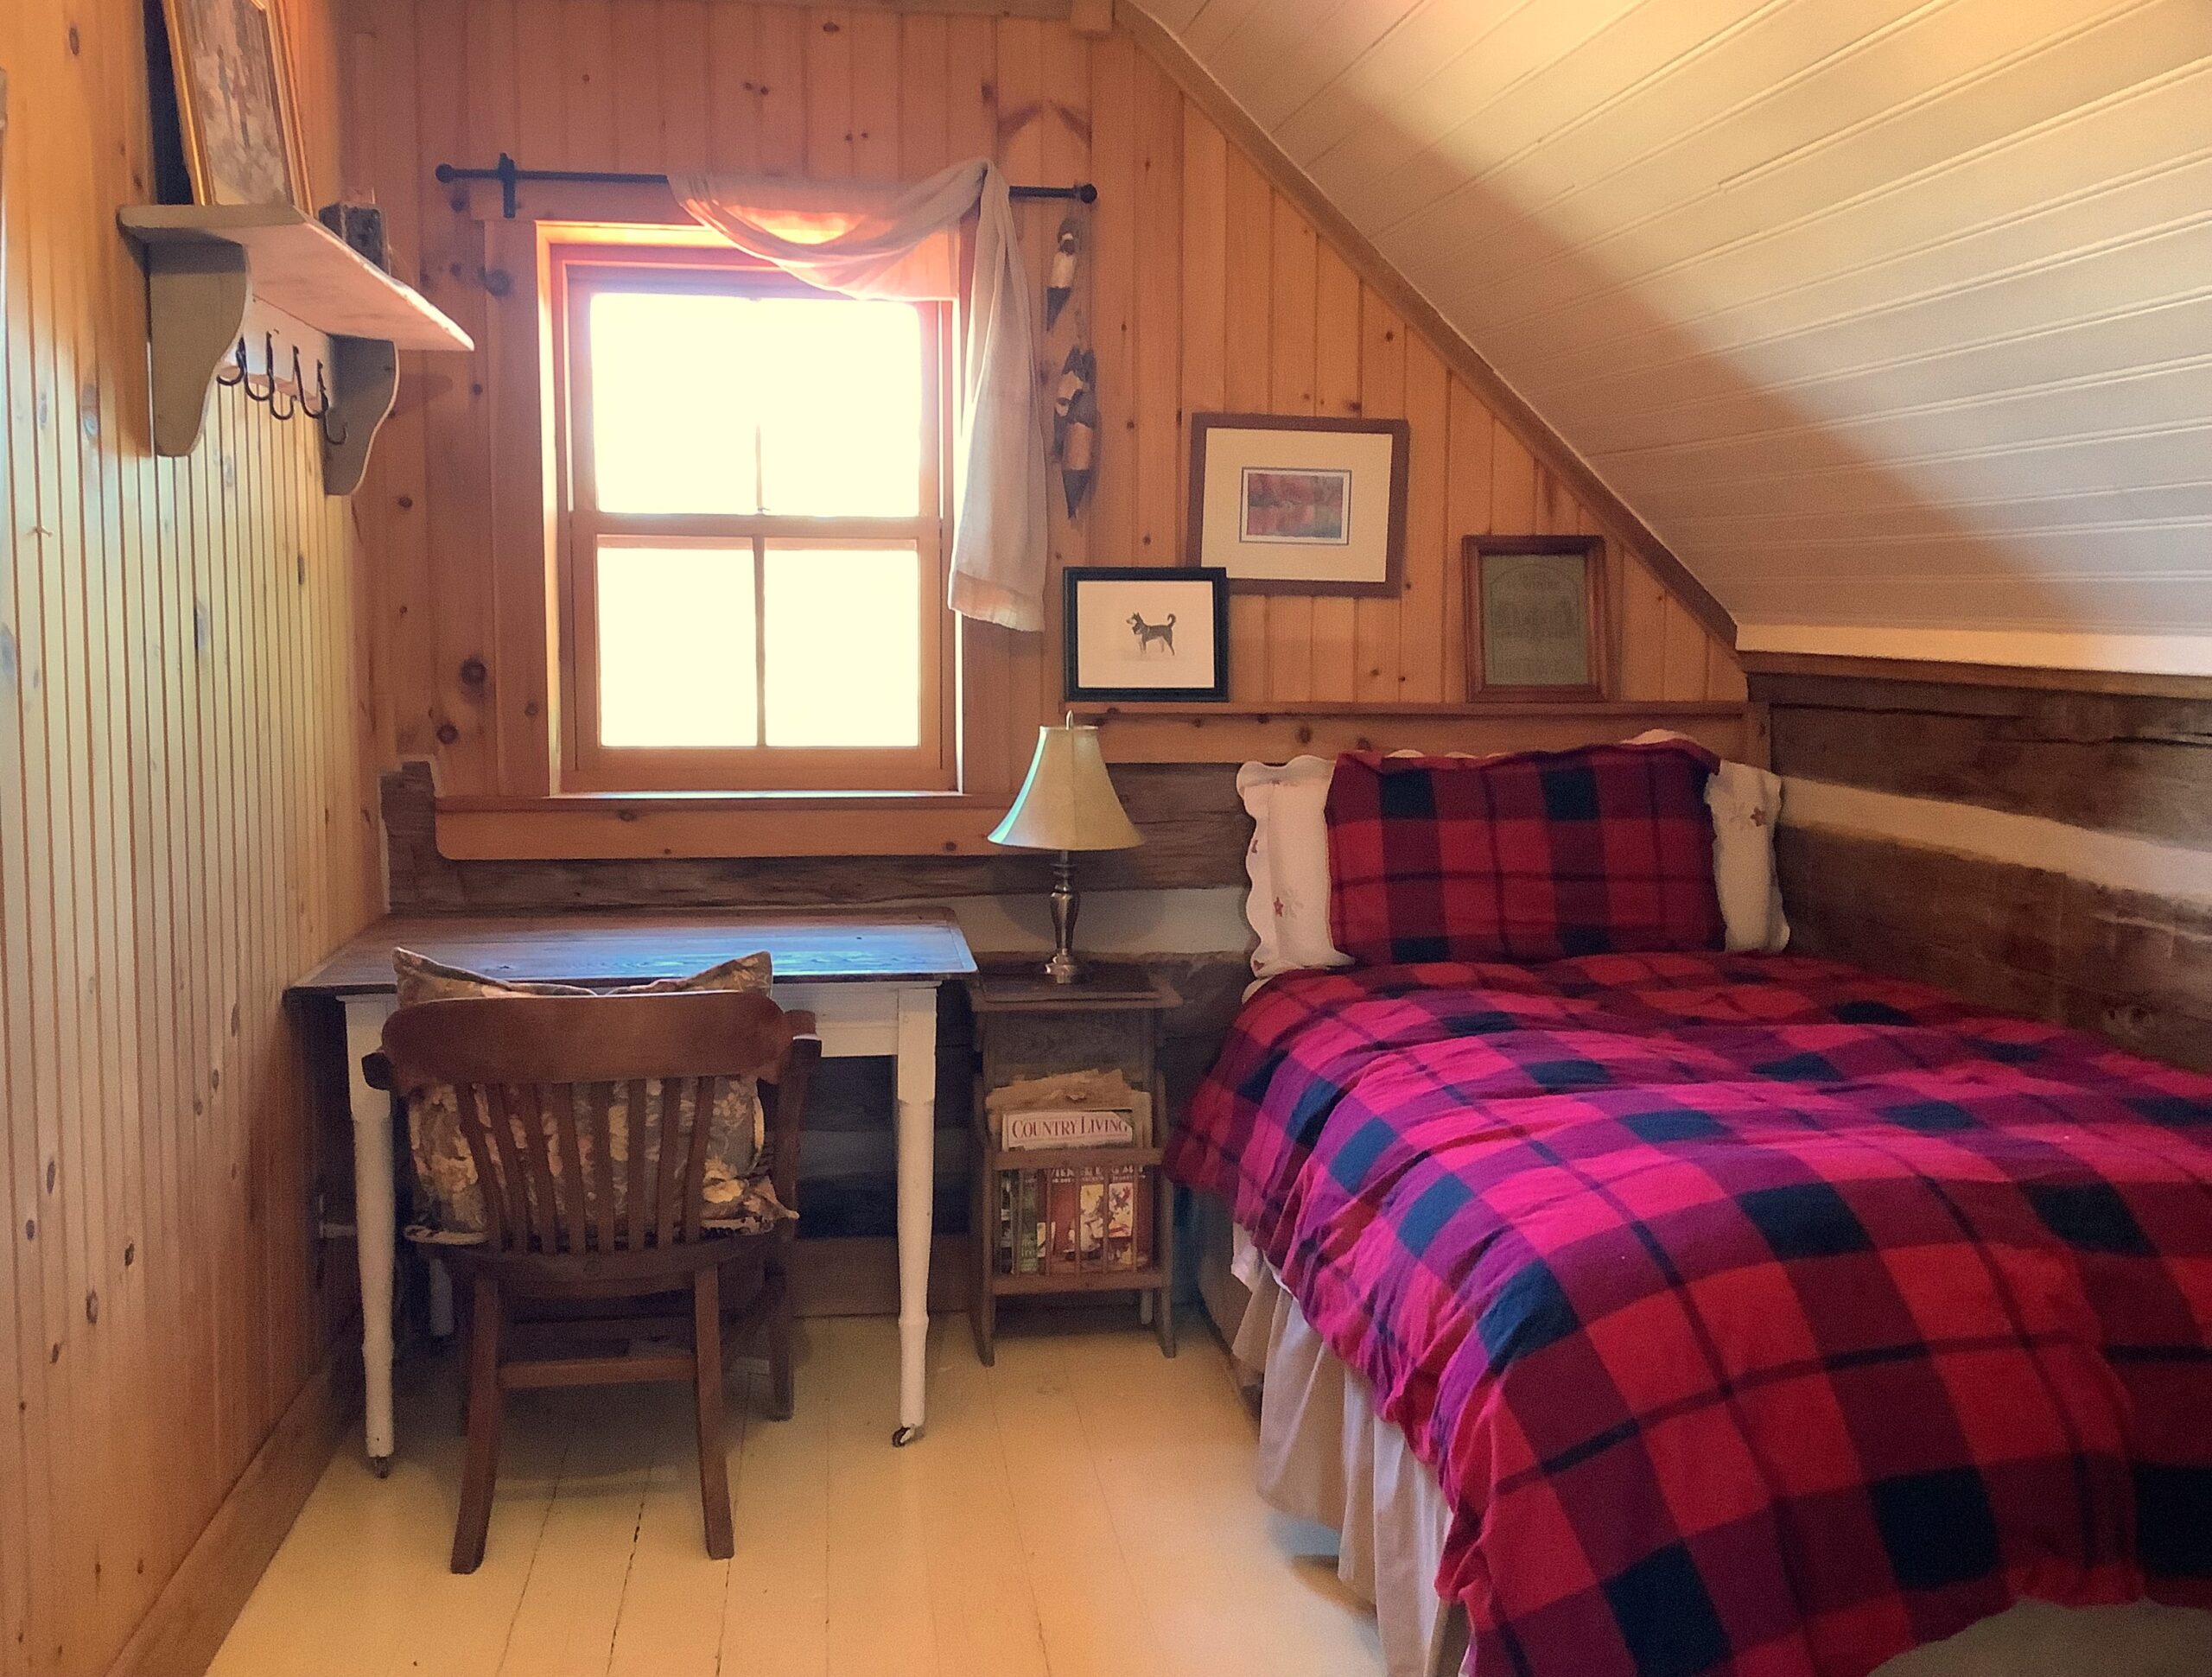 A small bedroom with one wall sloping toward the ceiling. The bedroom has a window, a small desk, and a bed with a red-and-white flannel patterned bedspread.